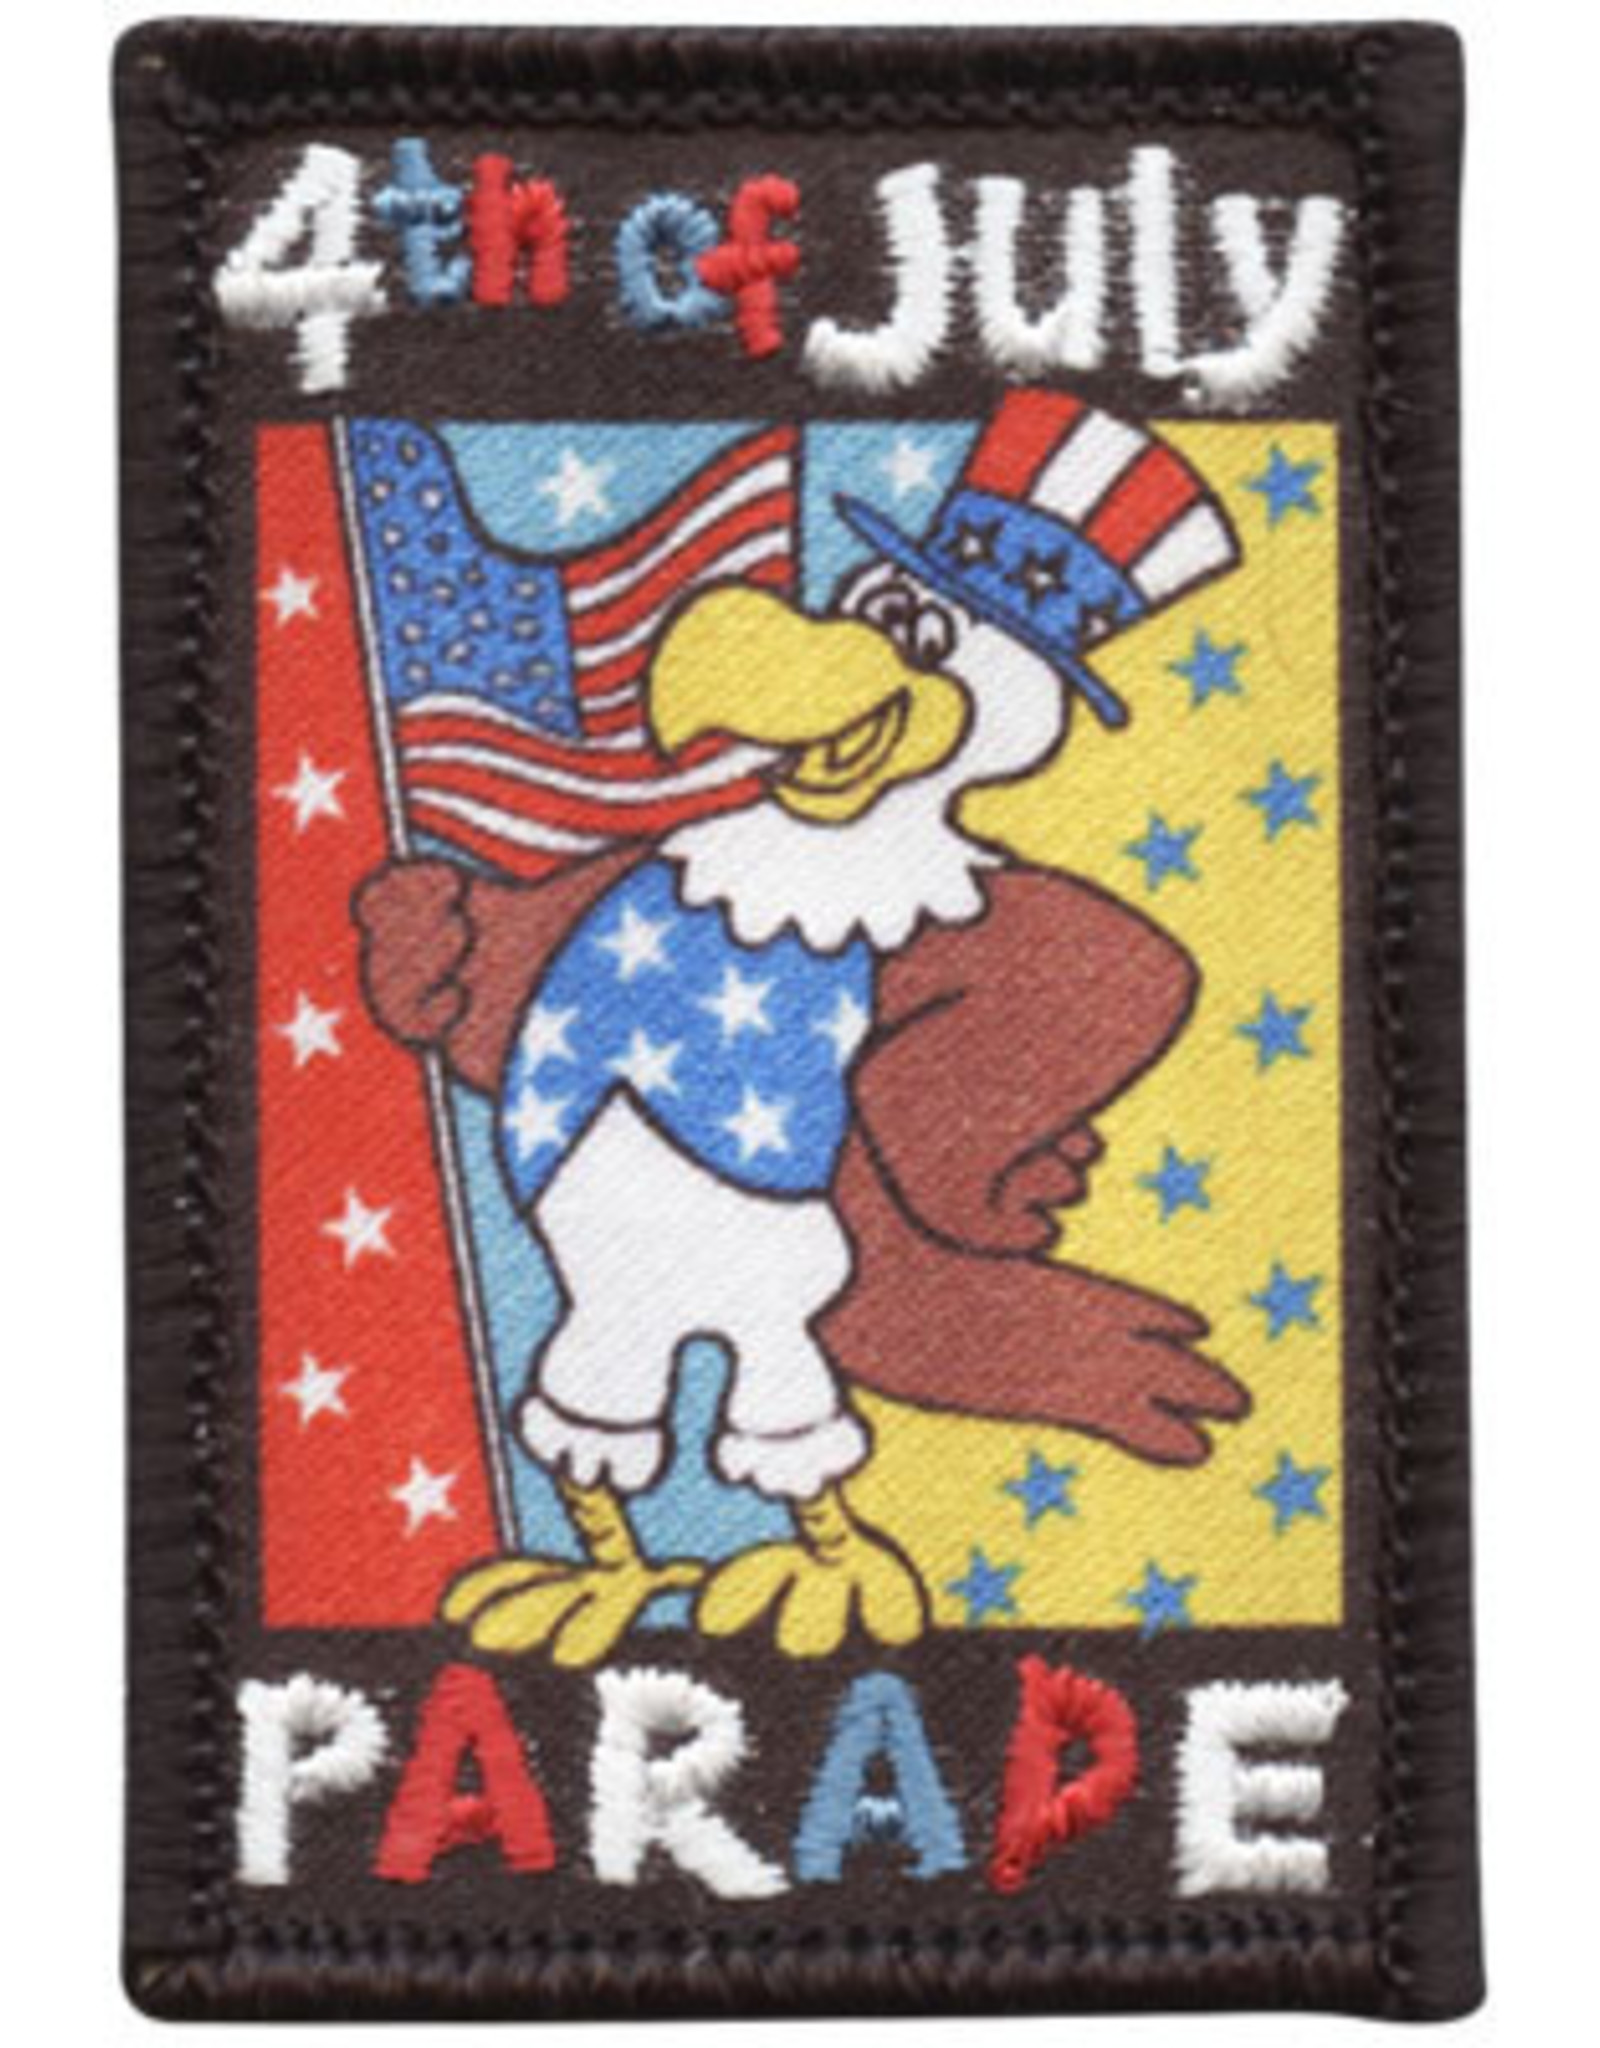 *4th of July Parade Fun Patch